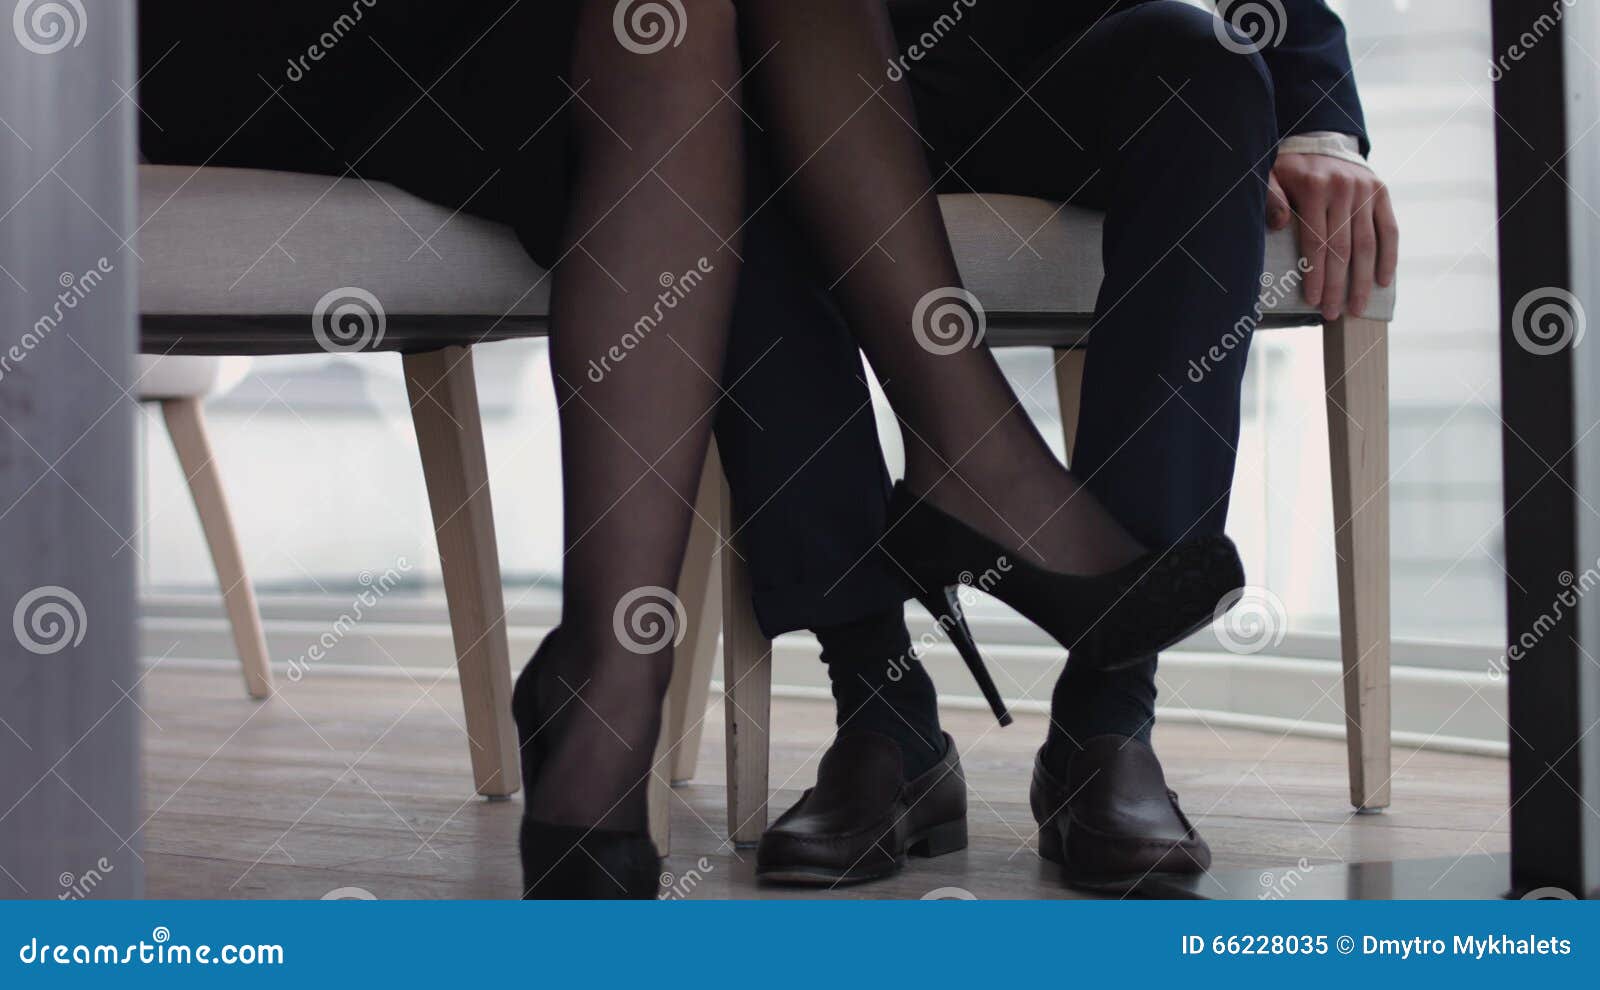 Playing footsie under the table